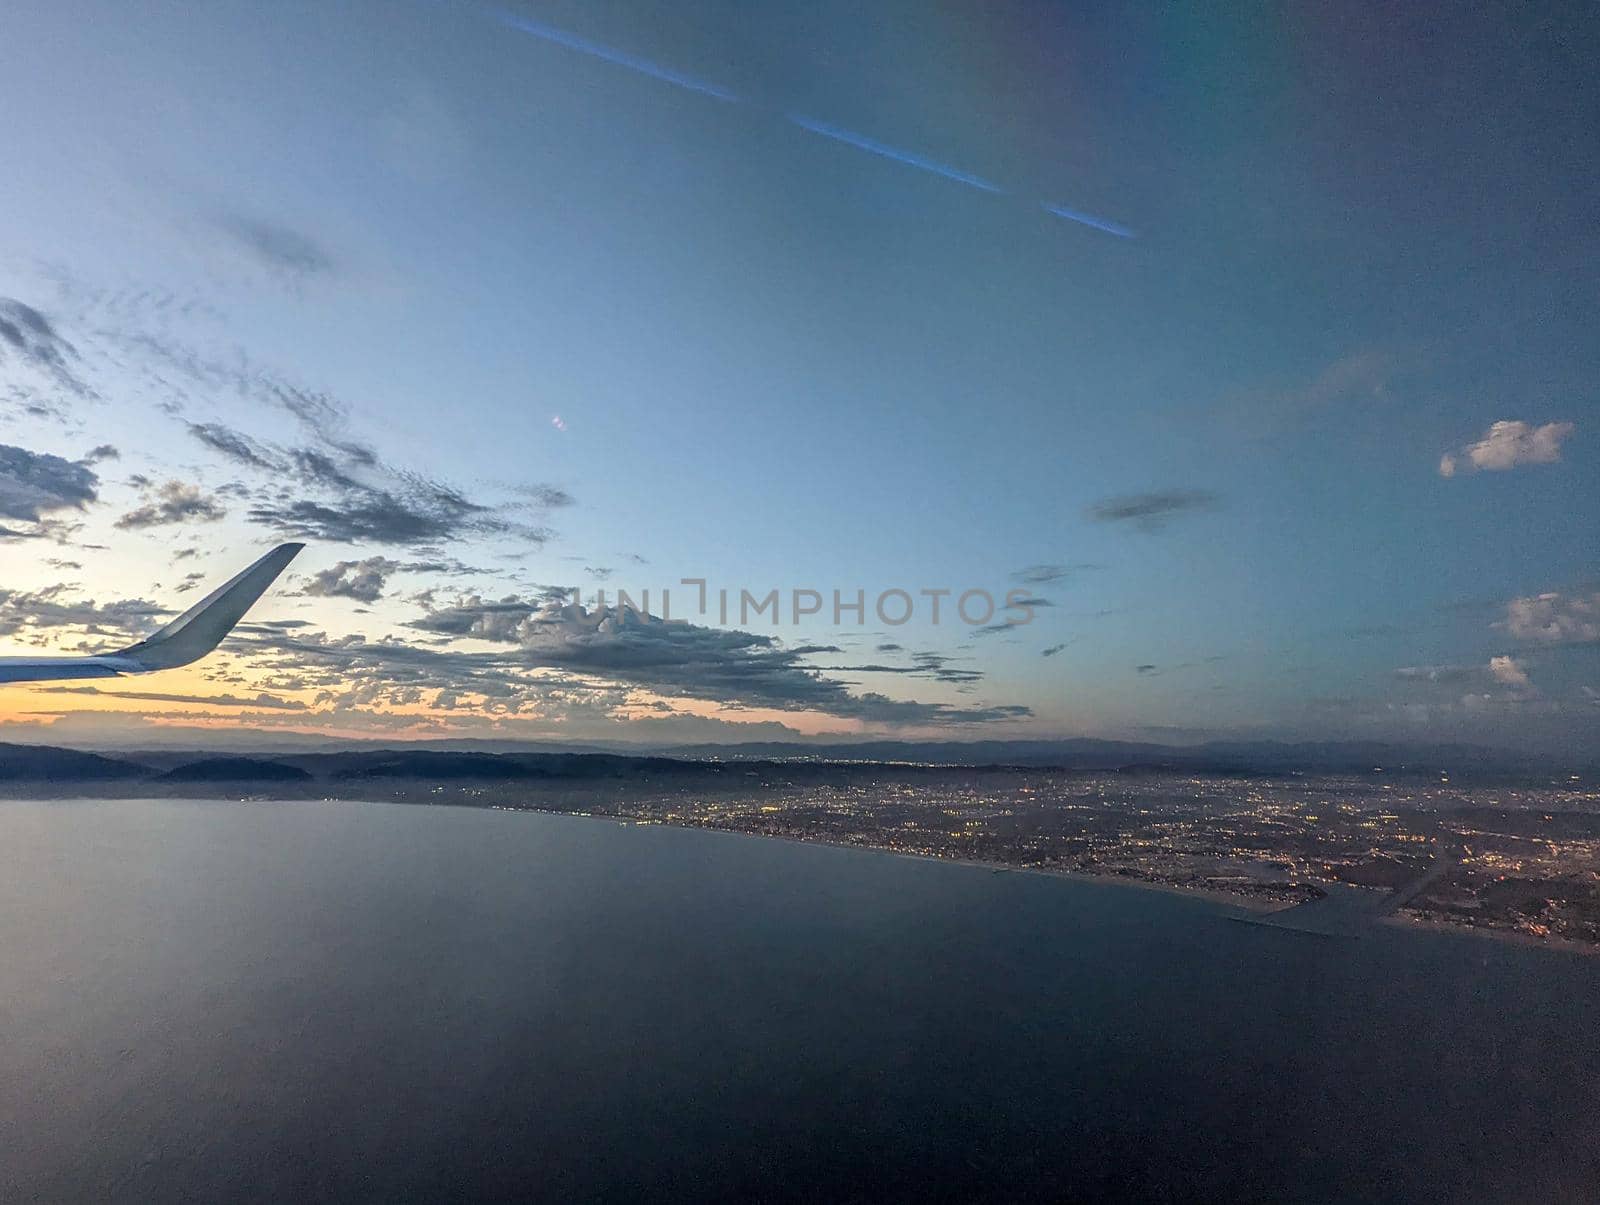 Clouds and sky as seen through window of an aircraft by digidreamgrafix